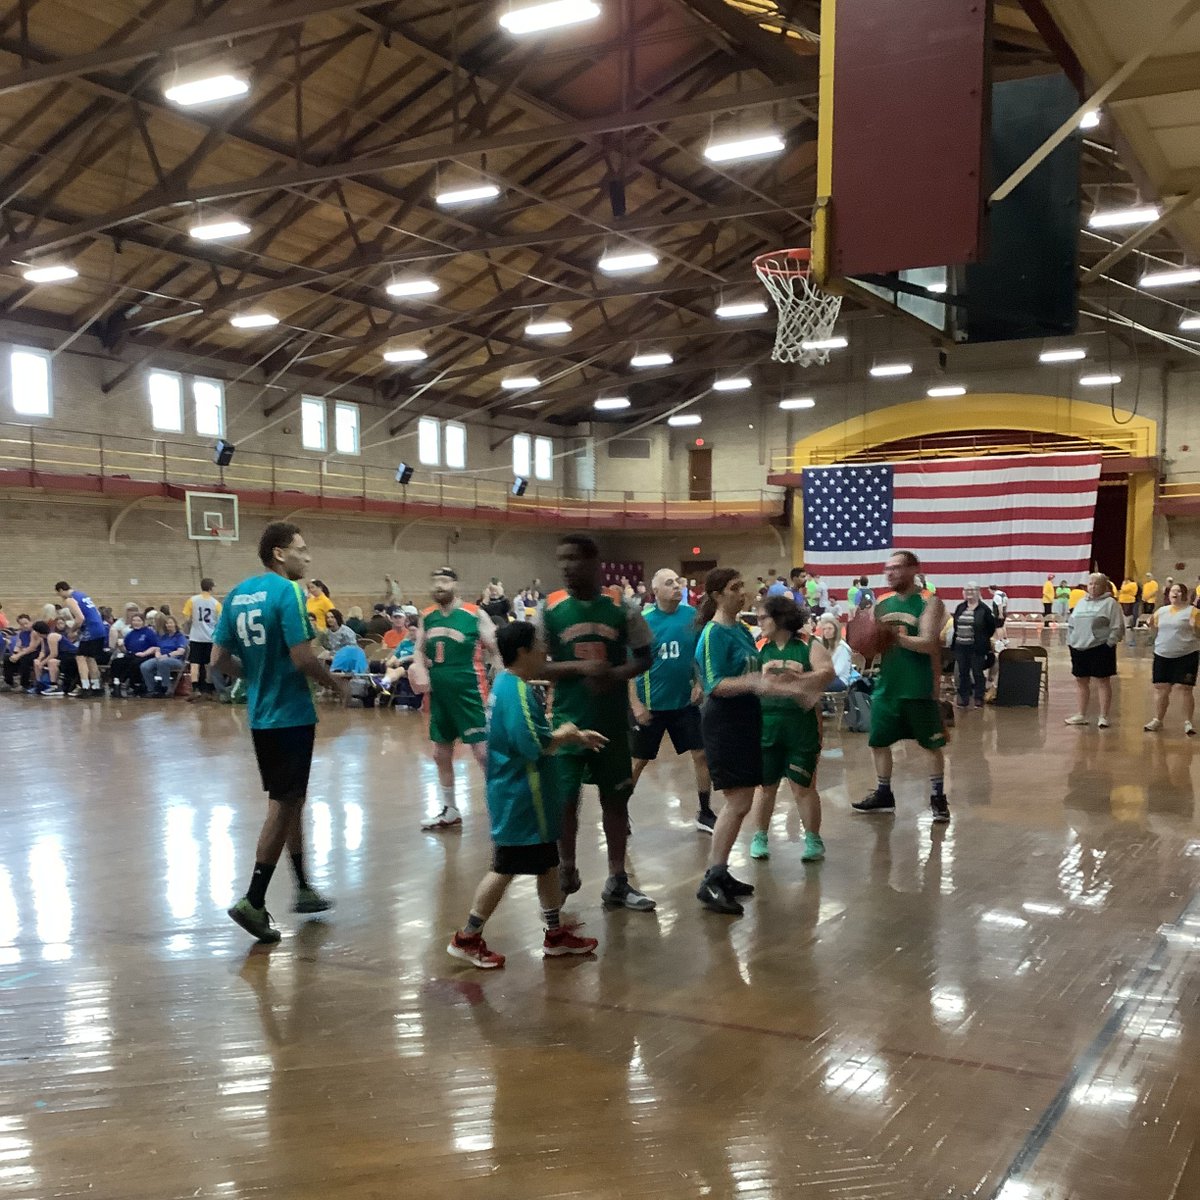 'Service to others before self' is a Norwich guiding value. HHPR students teamed up with @SOVT to put on an exciting basketball tournament! They were all in - organizing, promoting, volunteering - you name it they did it! #ExperientialLearning #CommunityService #NorwichForever